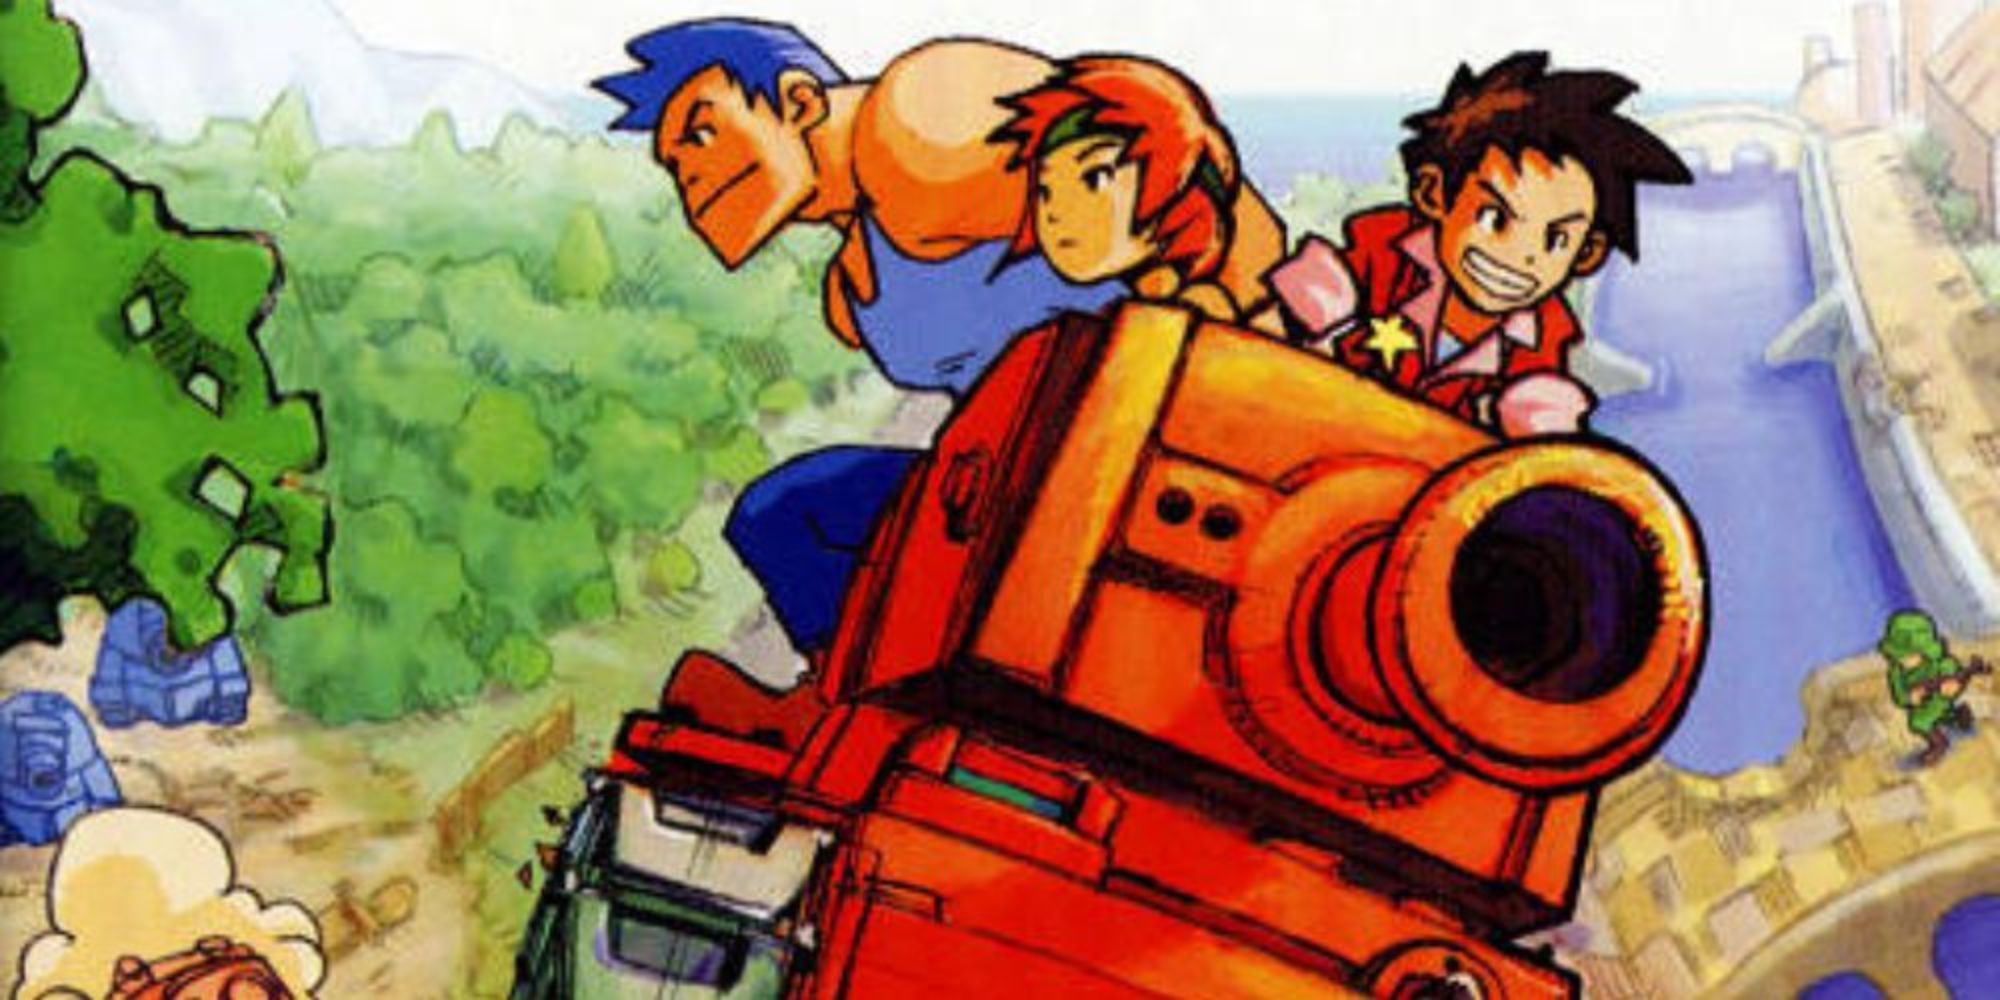 the cover of advance wars showing three characters peeking out of the top of a tank